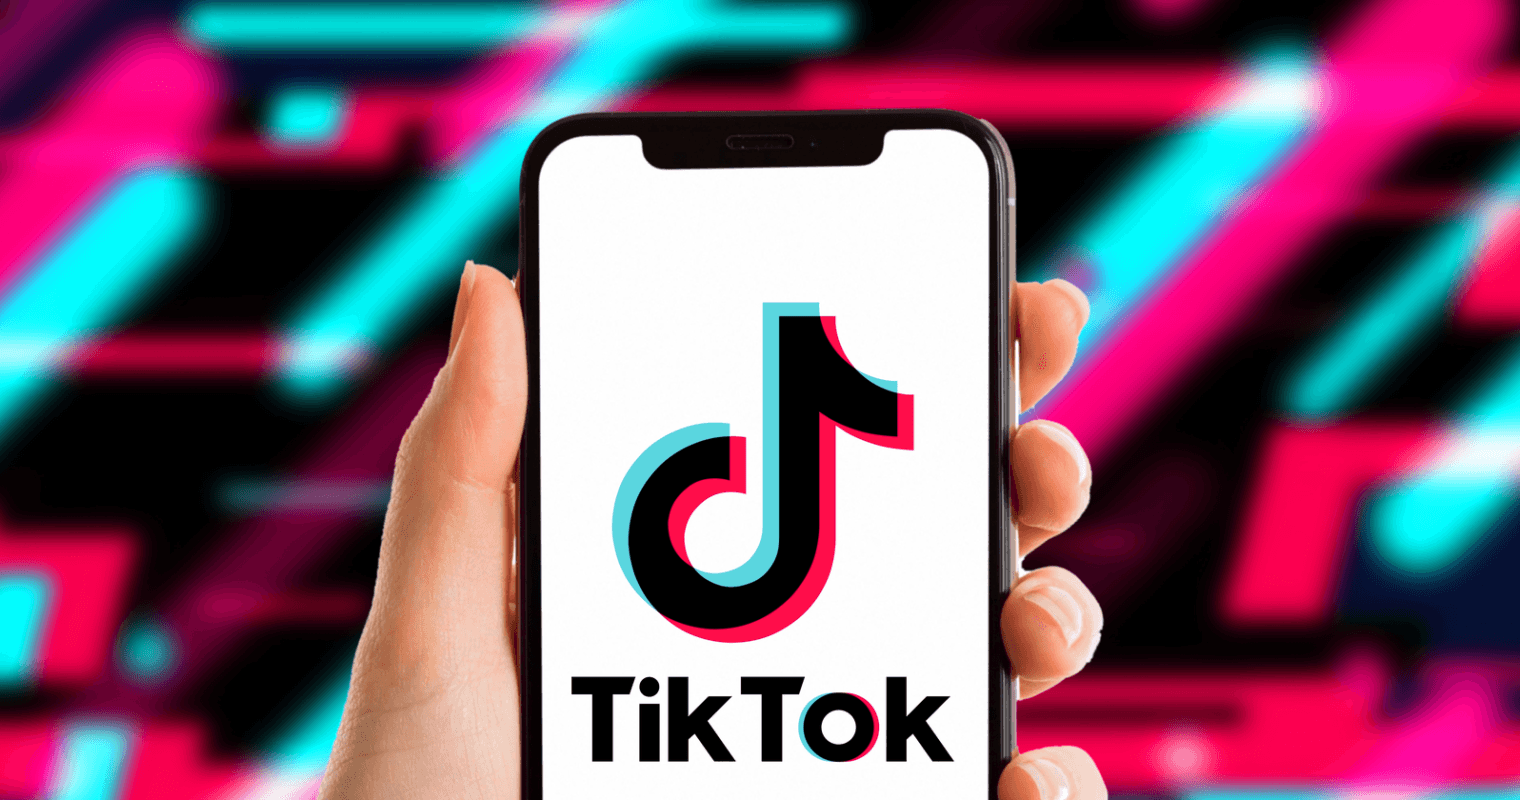 Tick Tock: Is Time About Up On TikTok? - #CSUSocial